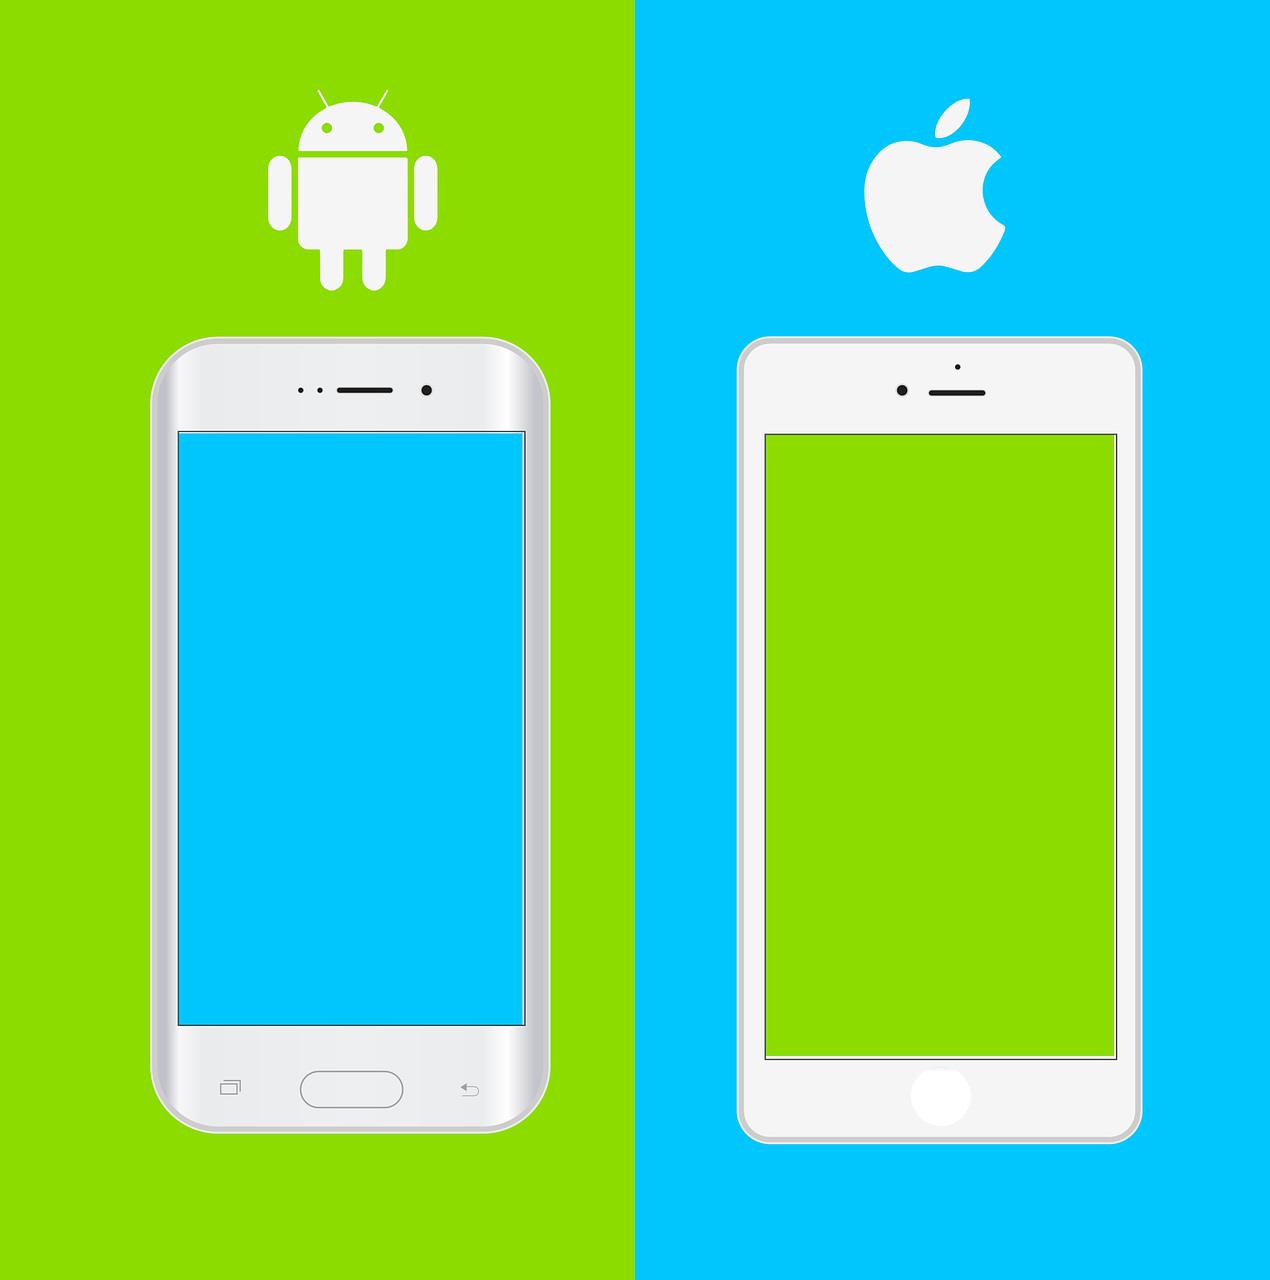 Android vs iOS apps